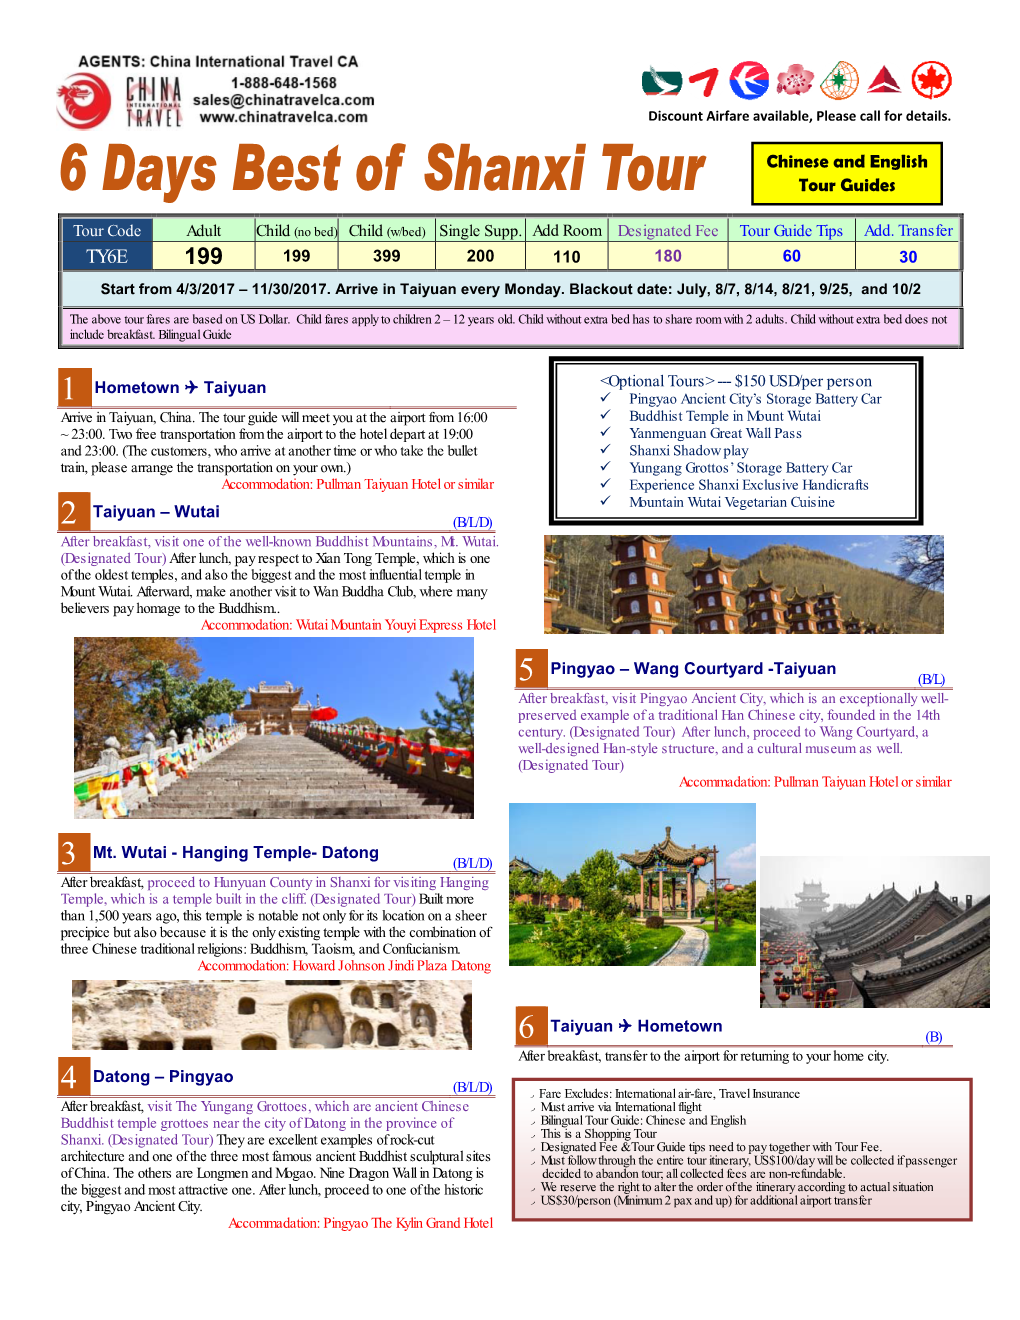 Best of Shanxi 6-Day Value Tour